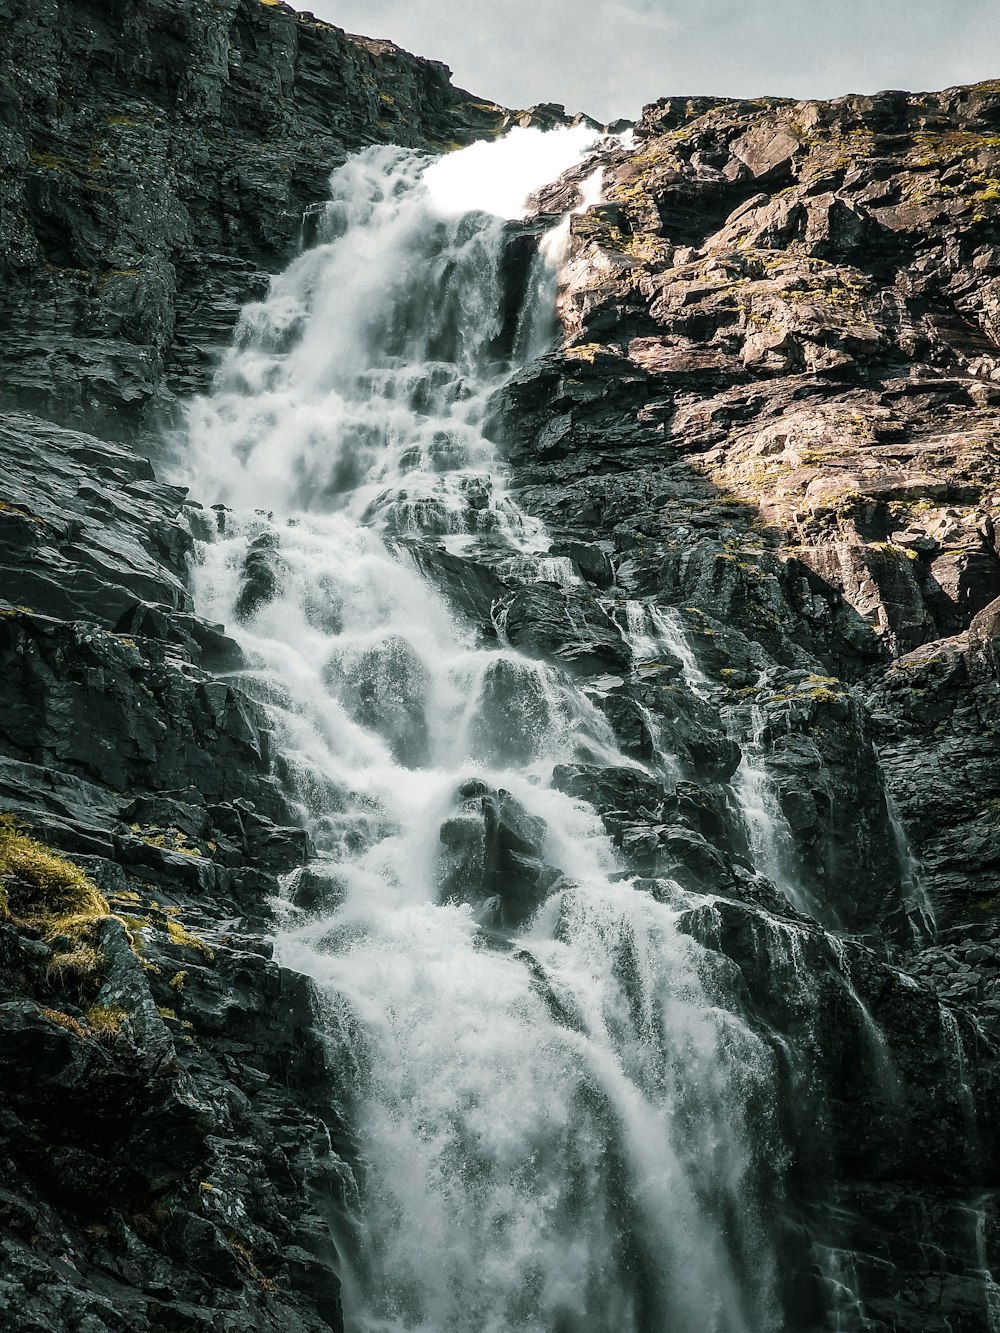 a waterfall in a rocky place